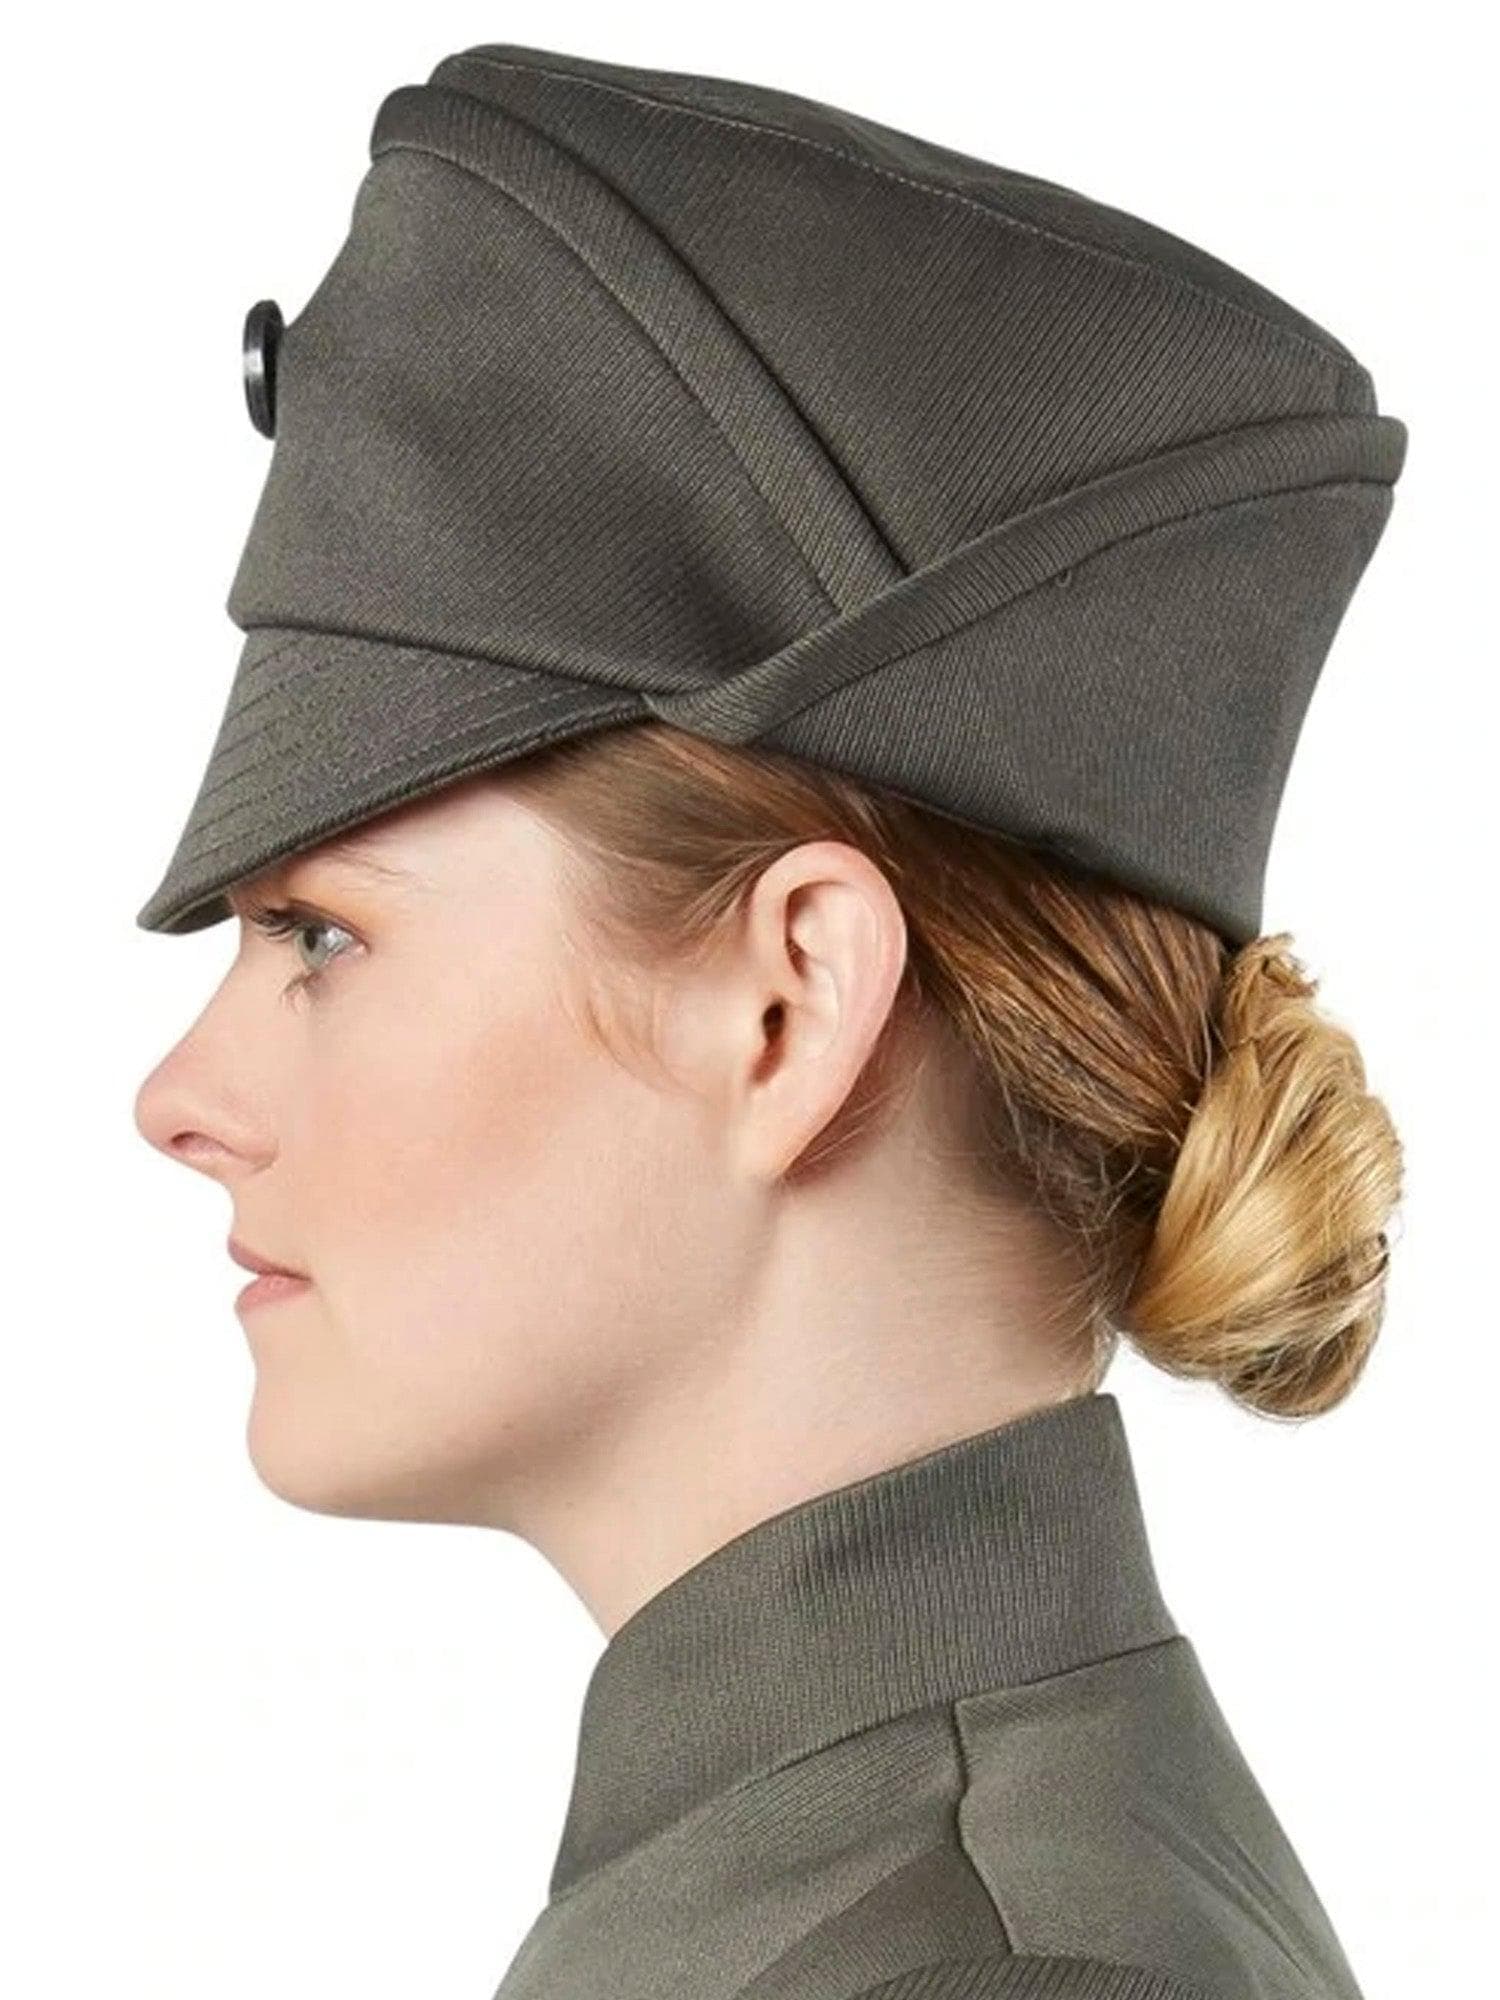 Denuo Novo Star Wars Imperial Officer Hat Accessory (Olive/Gray) - costumes.com